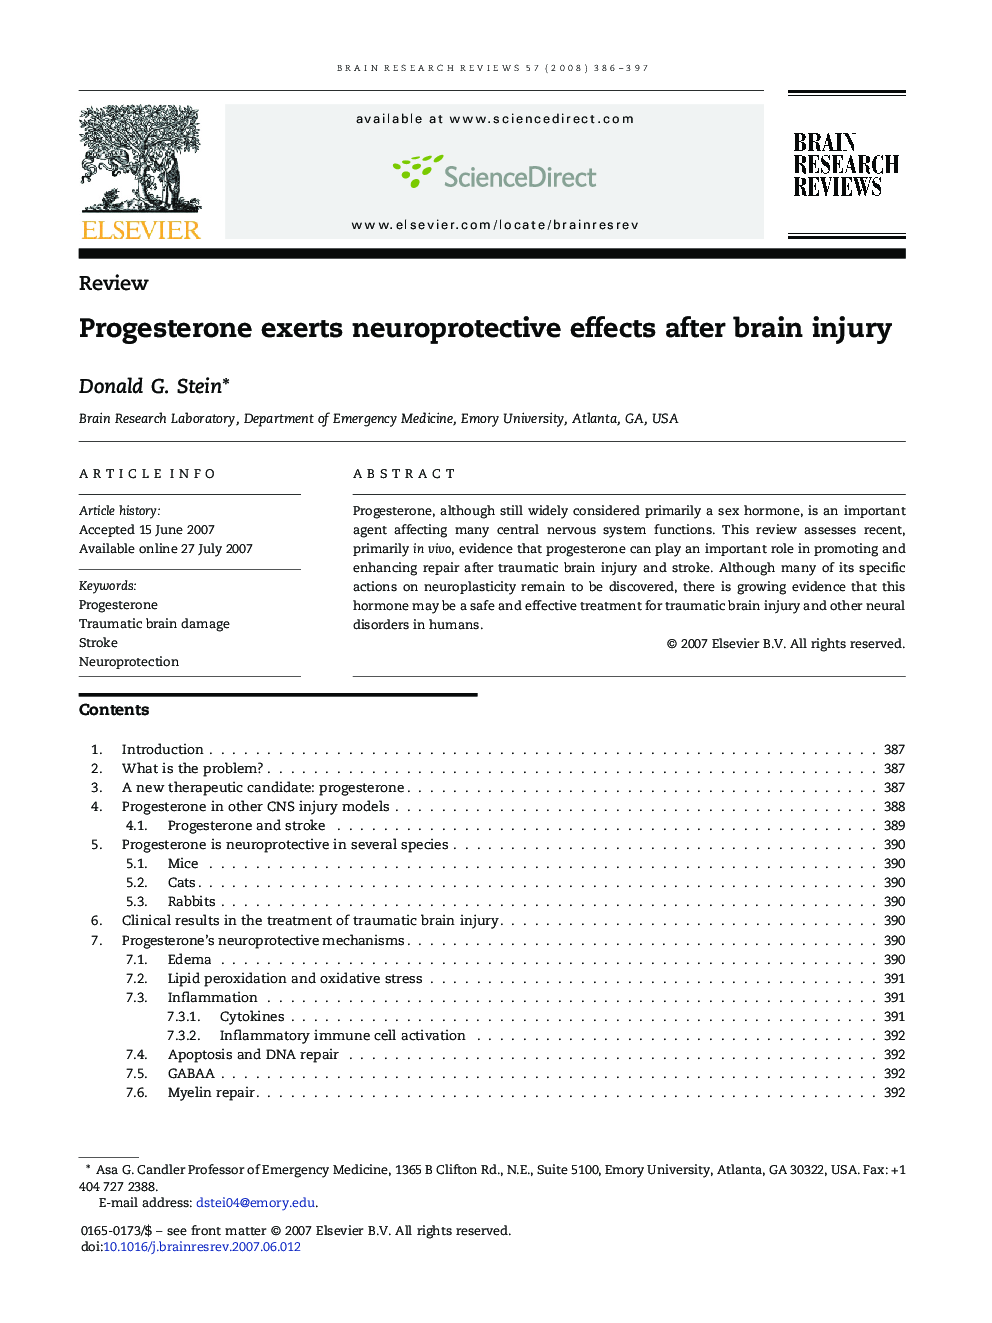 Progesterone exerts neuroprotective effects after brain injury